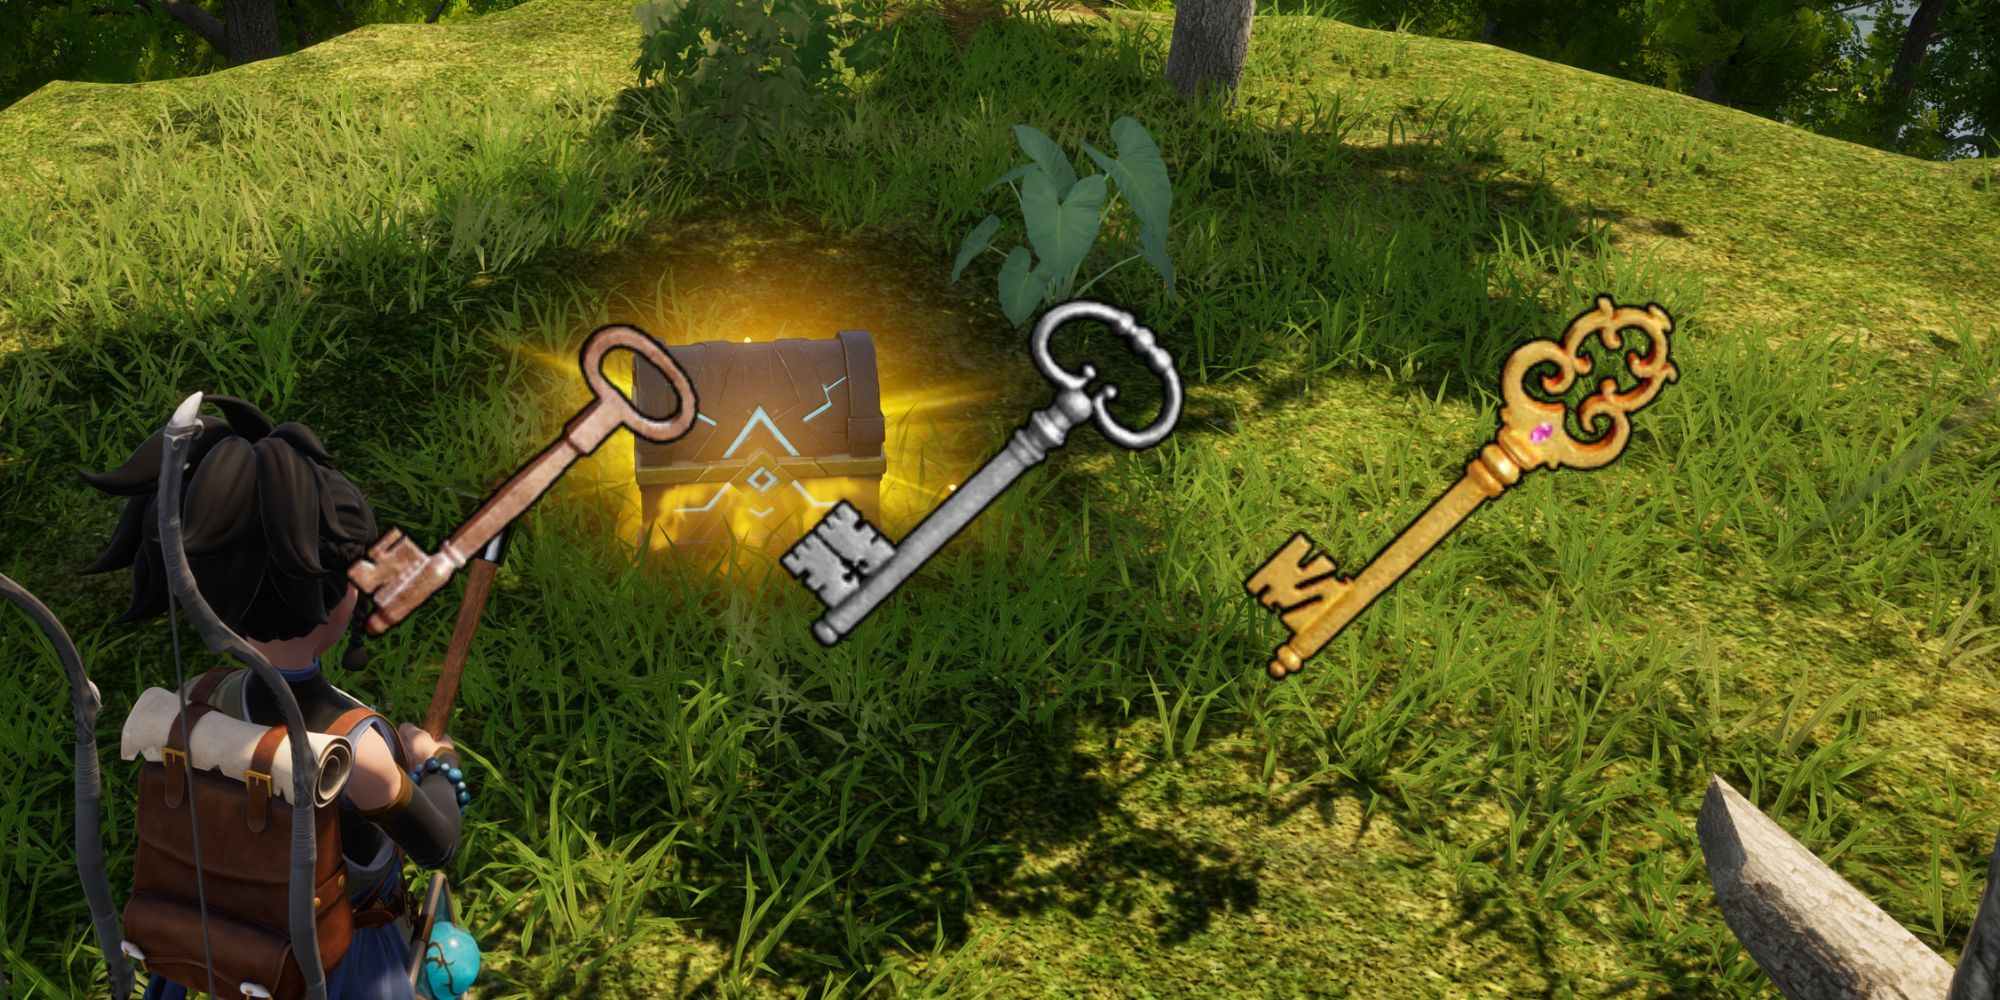 Palworld: An image of the player opening a silver chest with a copper, silver, and gold key over the image.